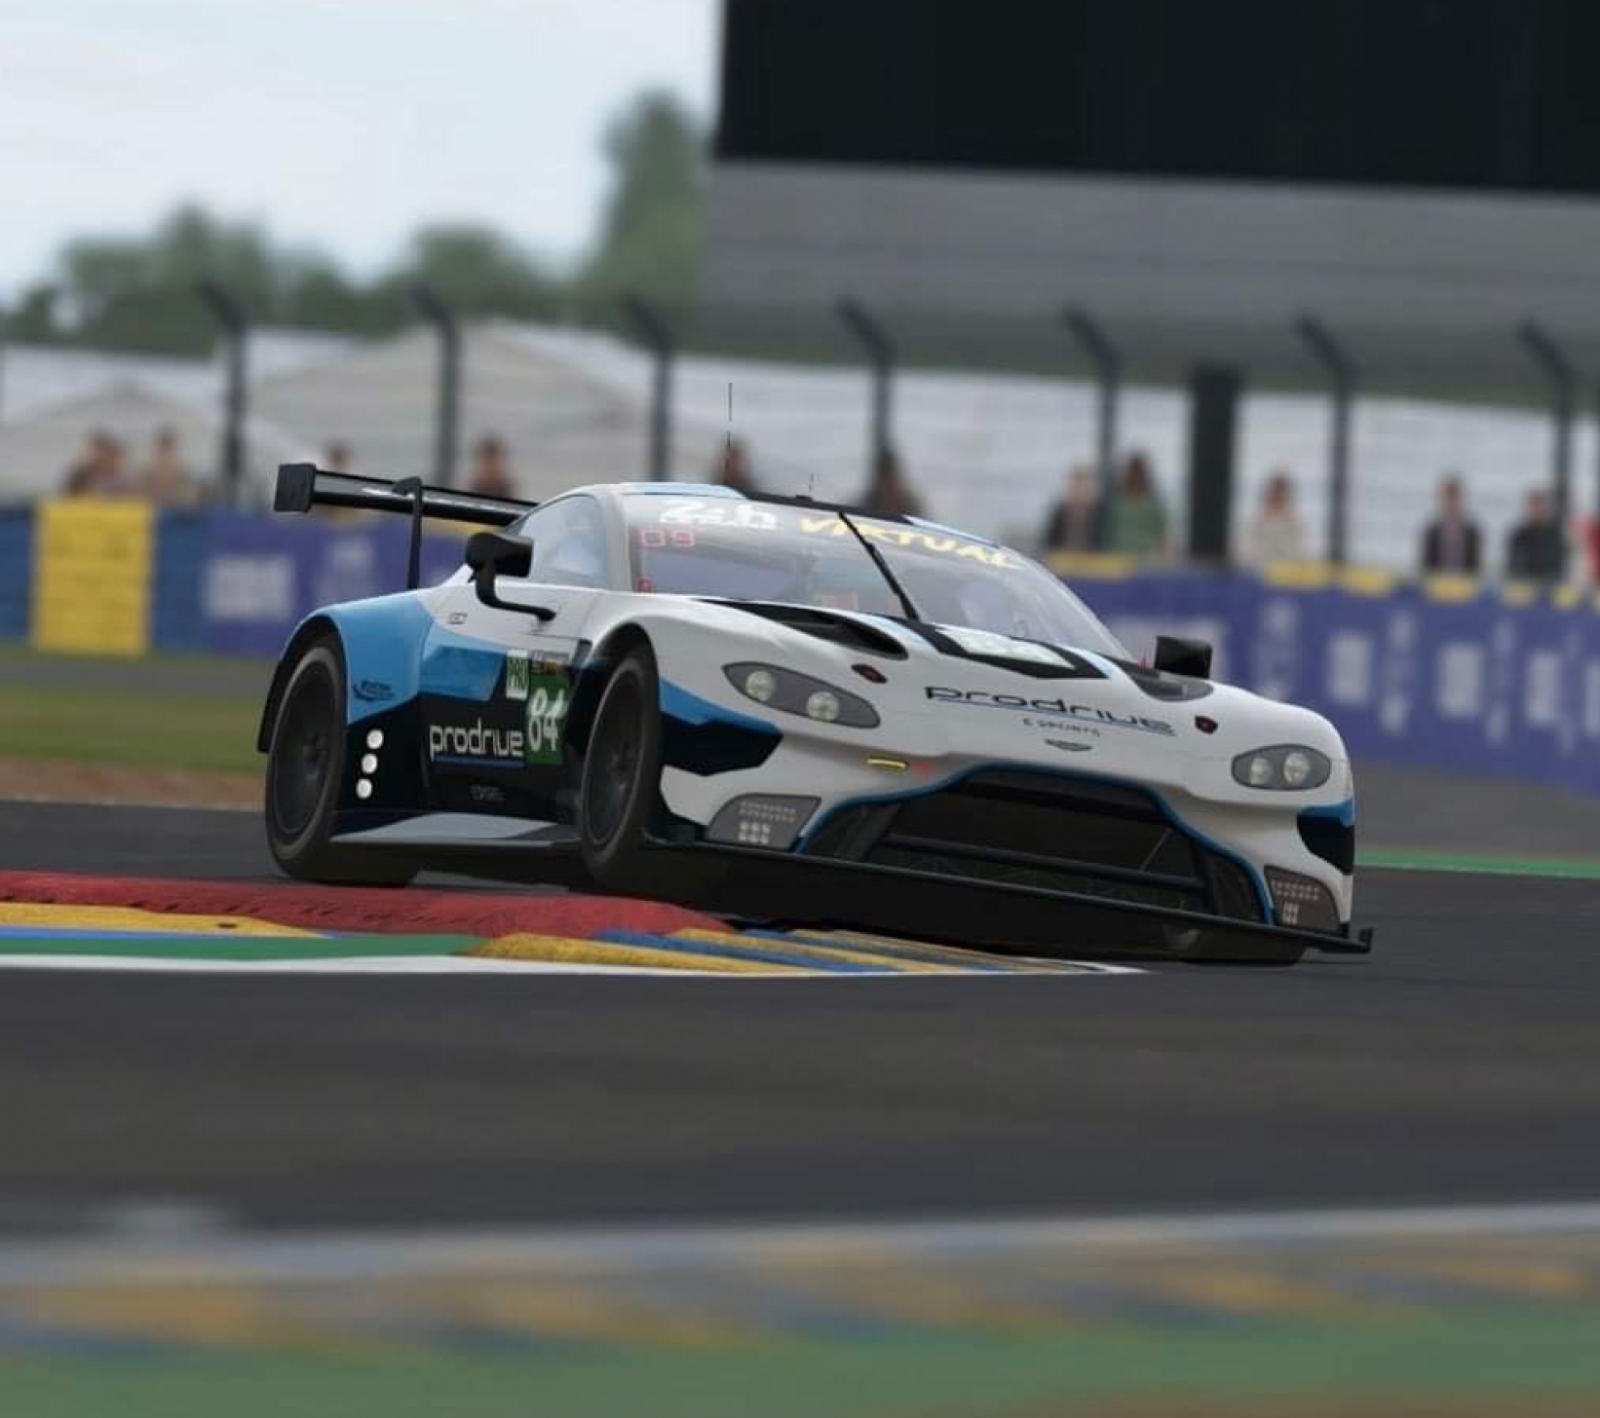 Tom to join the Prodrive E-Sports Team for the Le Mans 24 Virtual 